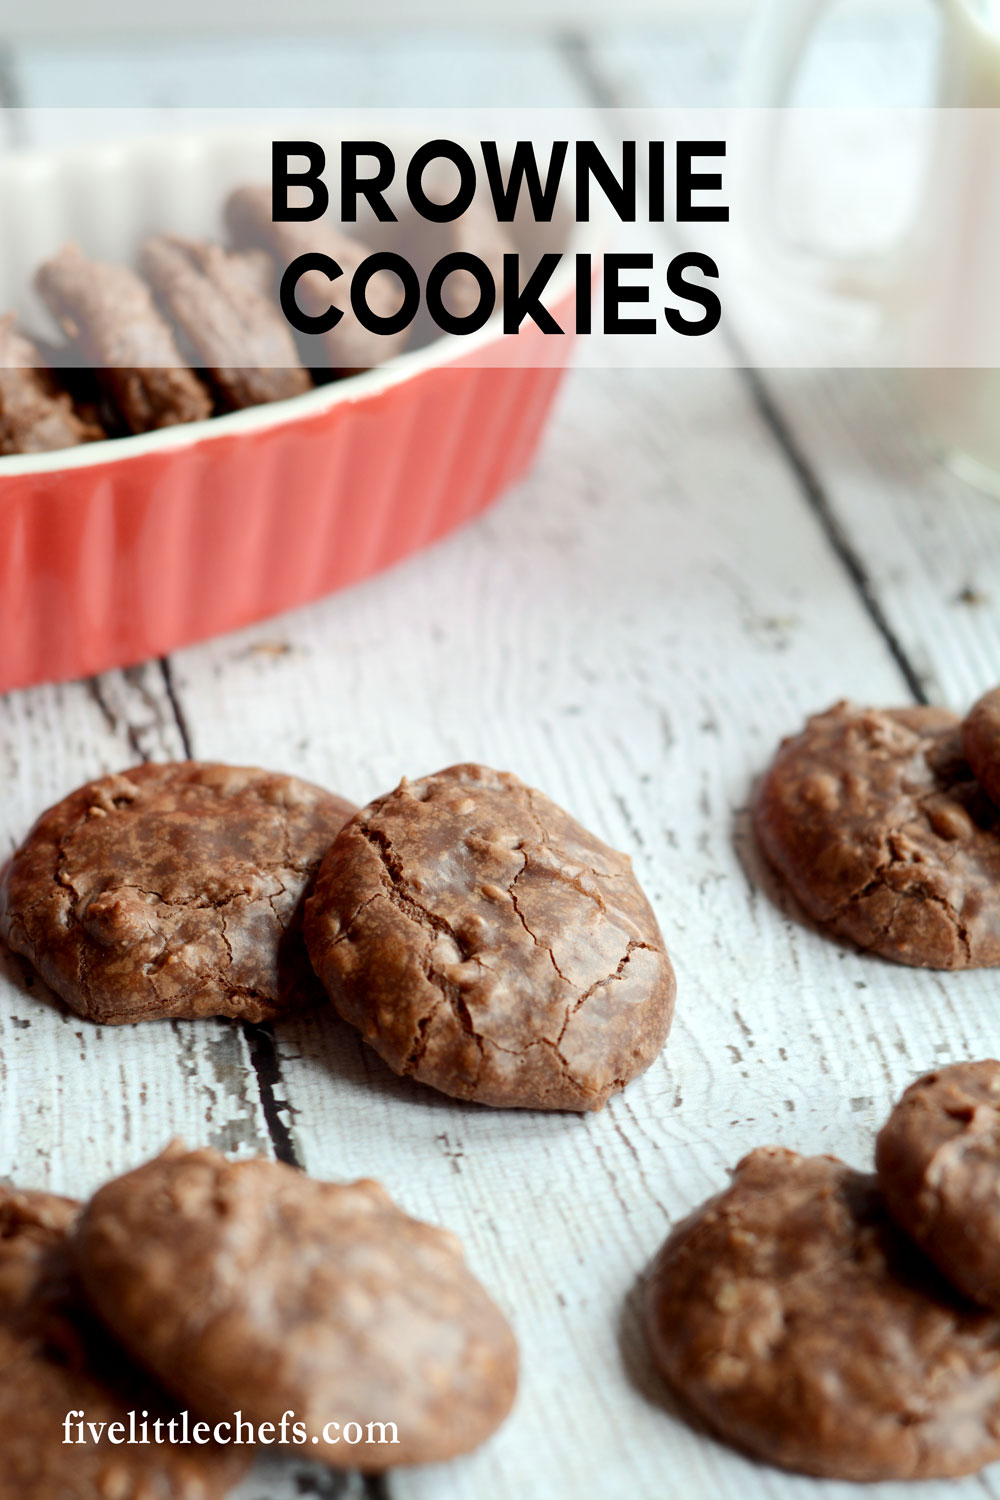 Brownie cookies are brownies and cookies all in one. If you love the chewy, chocolate corners of the brownie pan you will love these brownie cookies. This from scratch recipe is easy and fast. You will need to make a second batch!